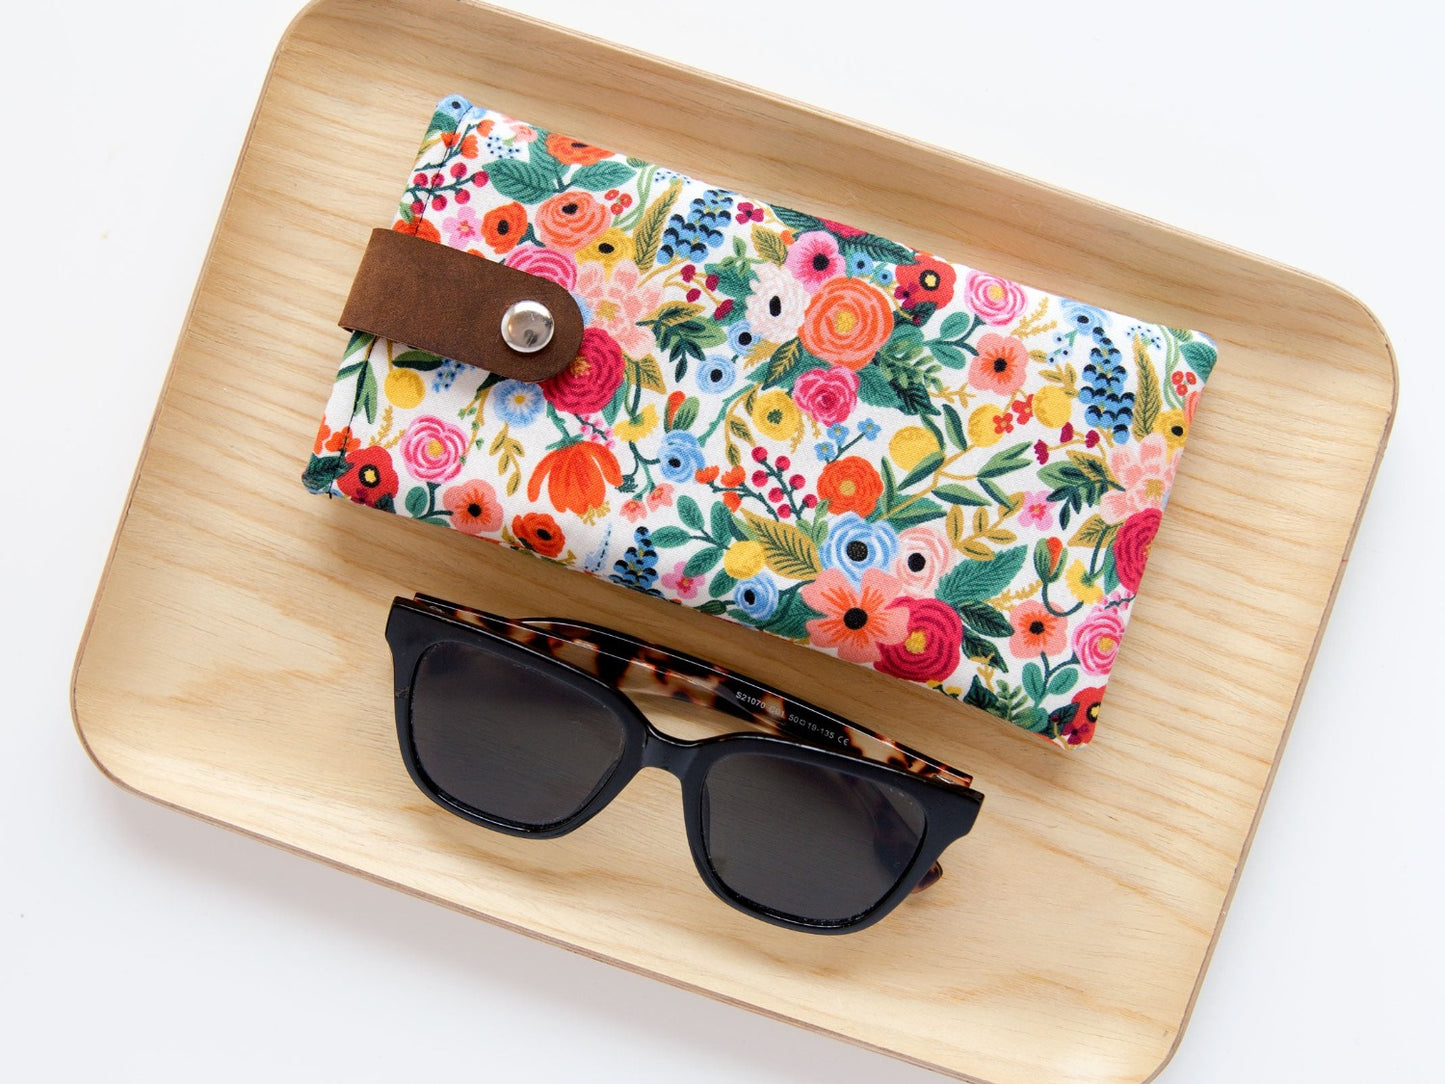 Sunglasses sitting on a wooden plate beside a floral glasses case